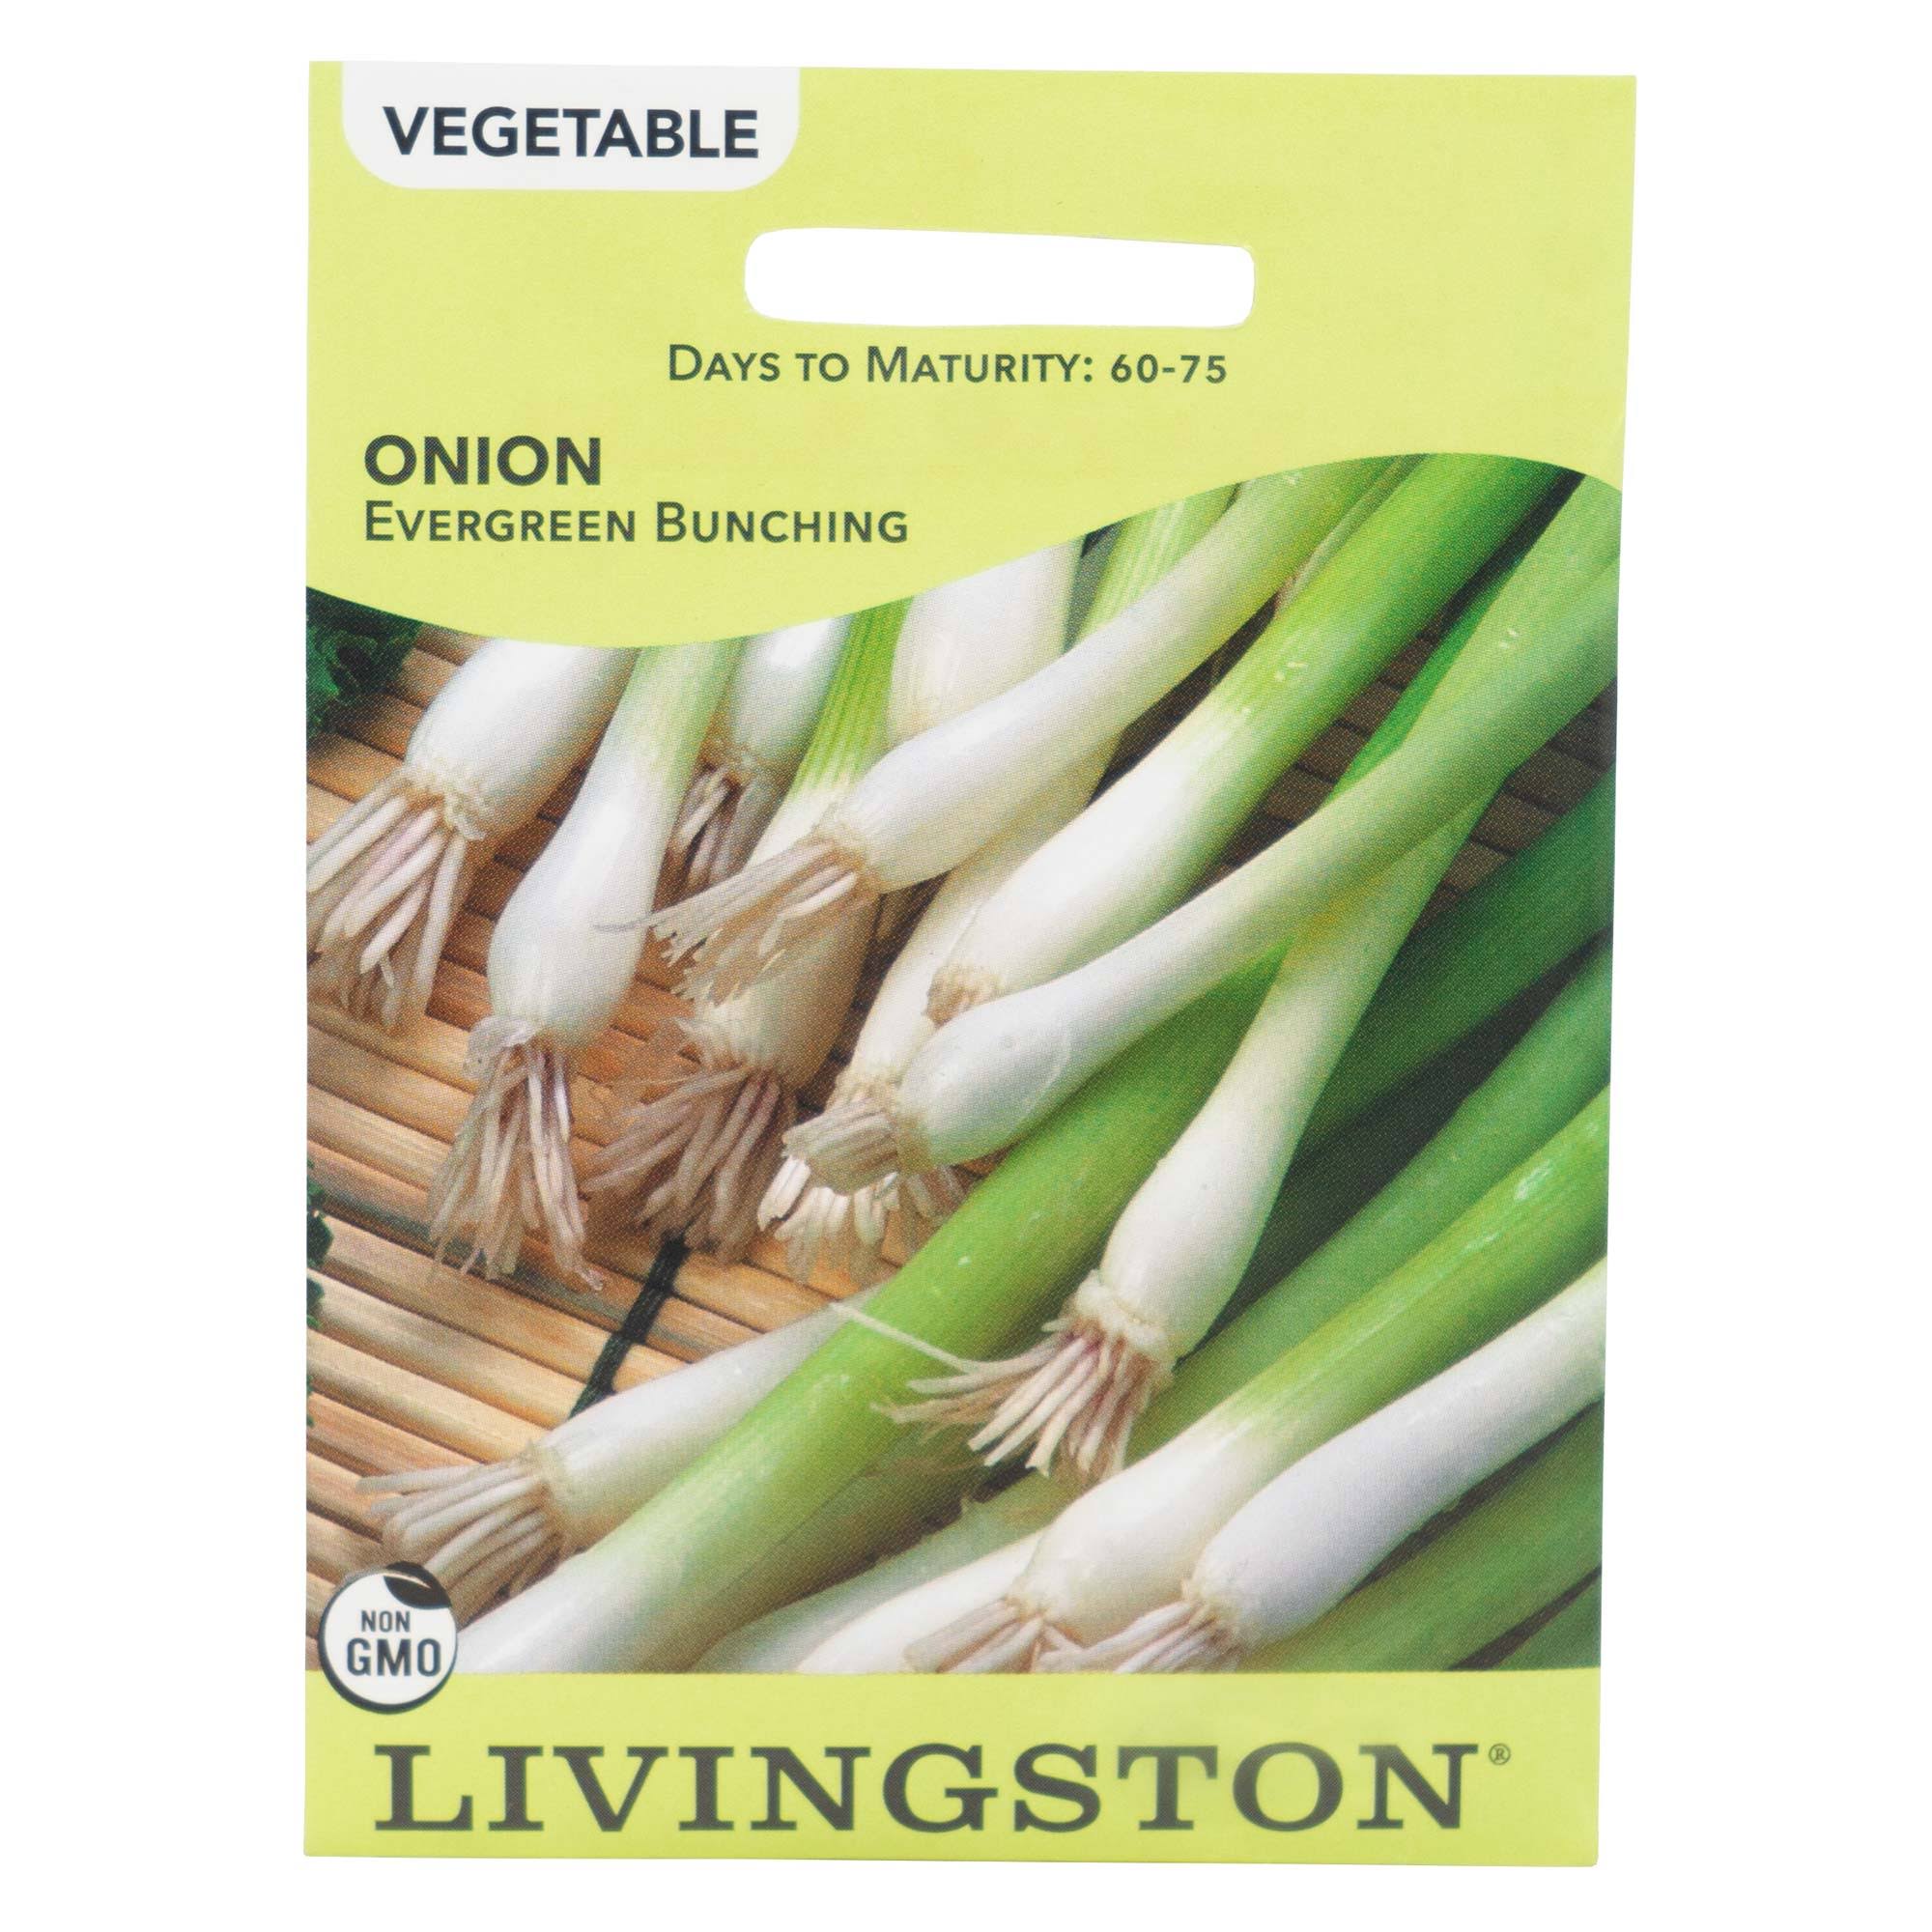 Livingston Seeds Onions Non-GMO Evergreen Bunching Seeds Packet